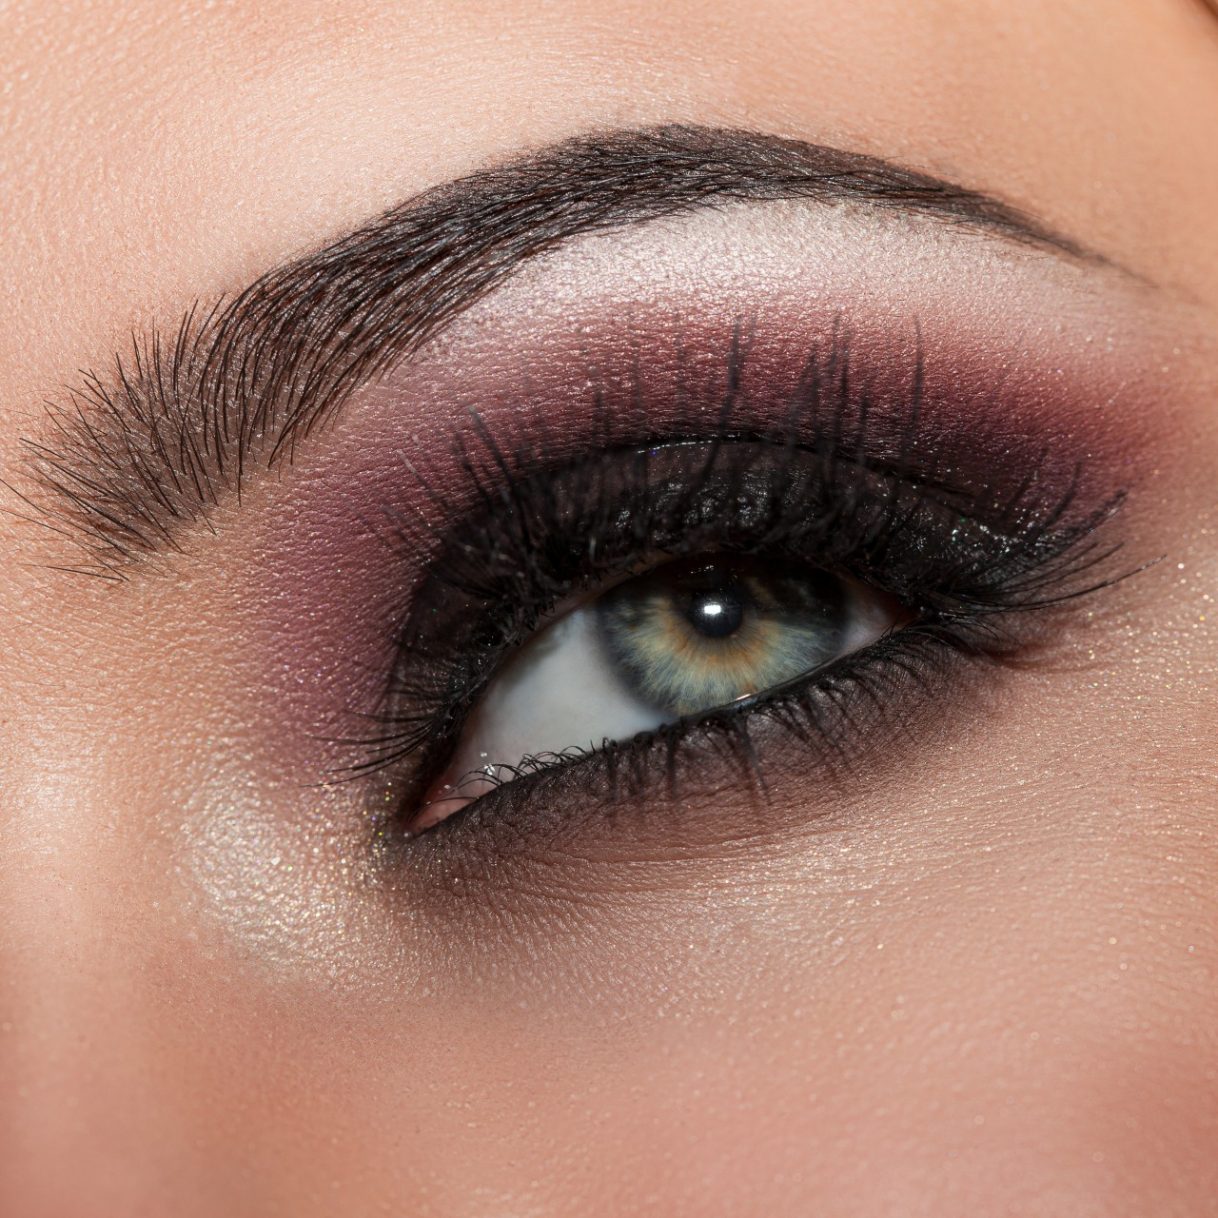 Eye Makeup Styles For Asians Expert Makeup Tips To Make Your Eye Makeup Pop Frends Beauty Blog